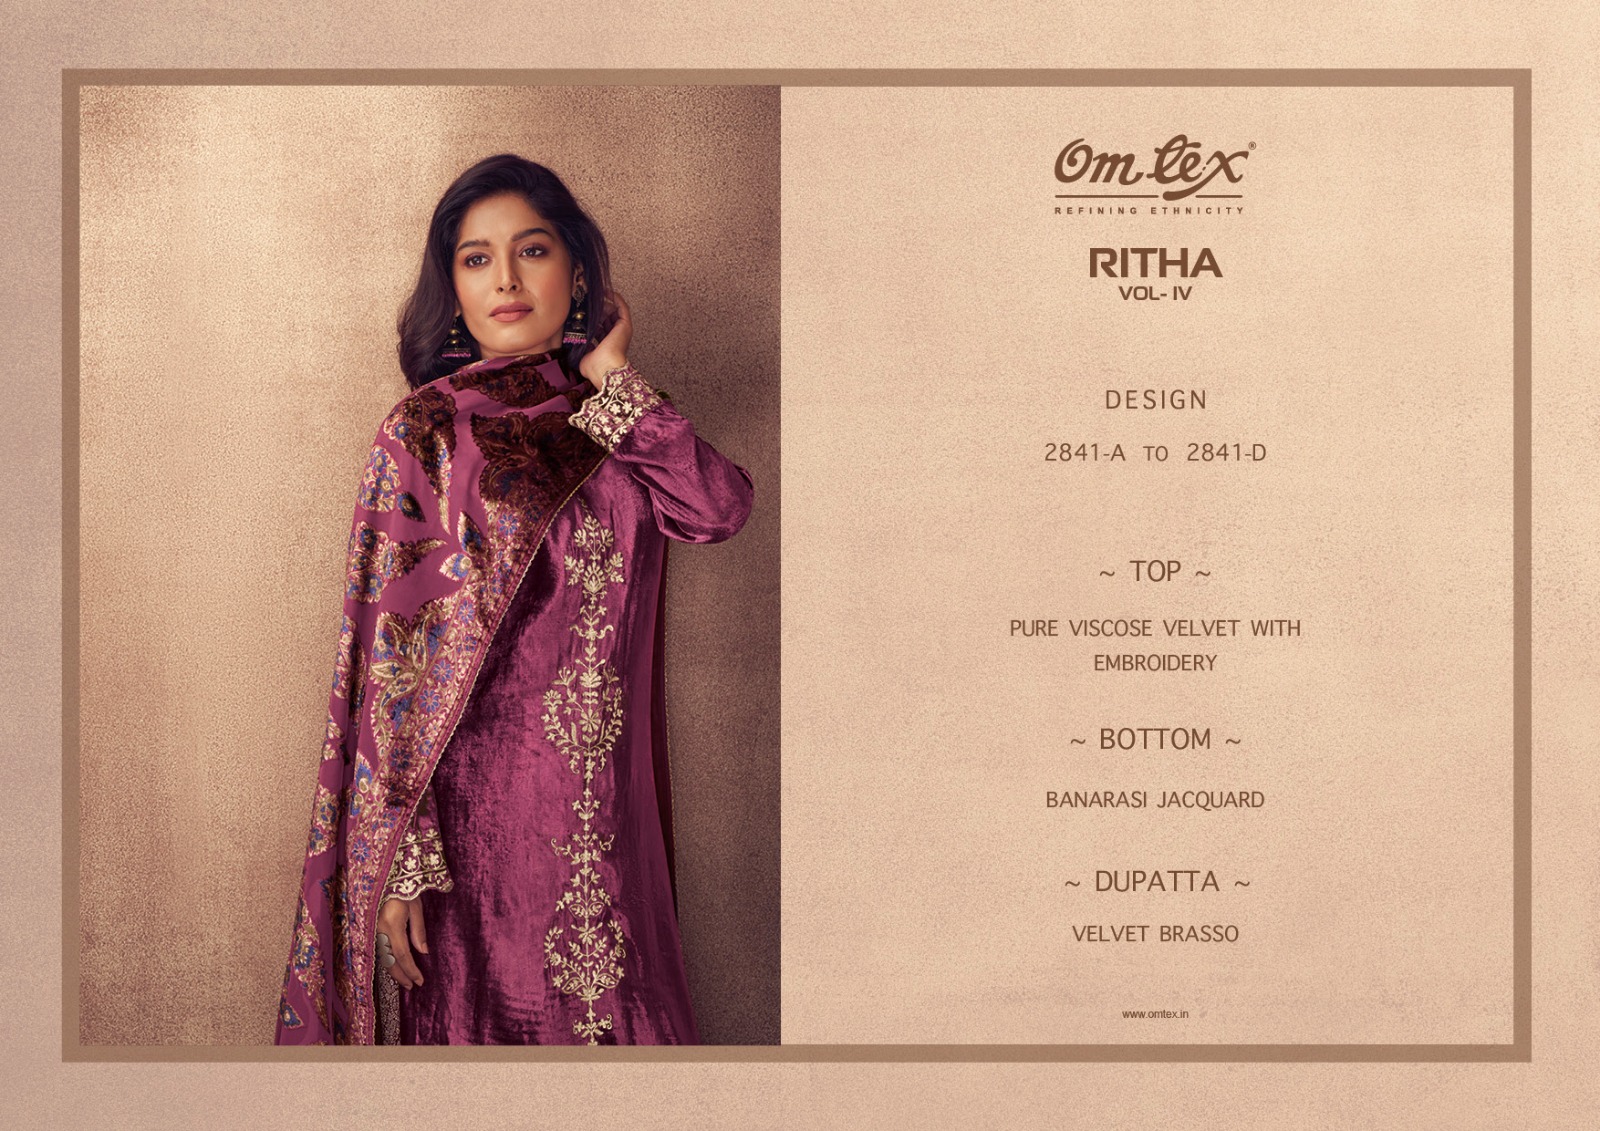 Omtex Ritha Vol 4 collection 5